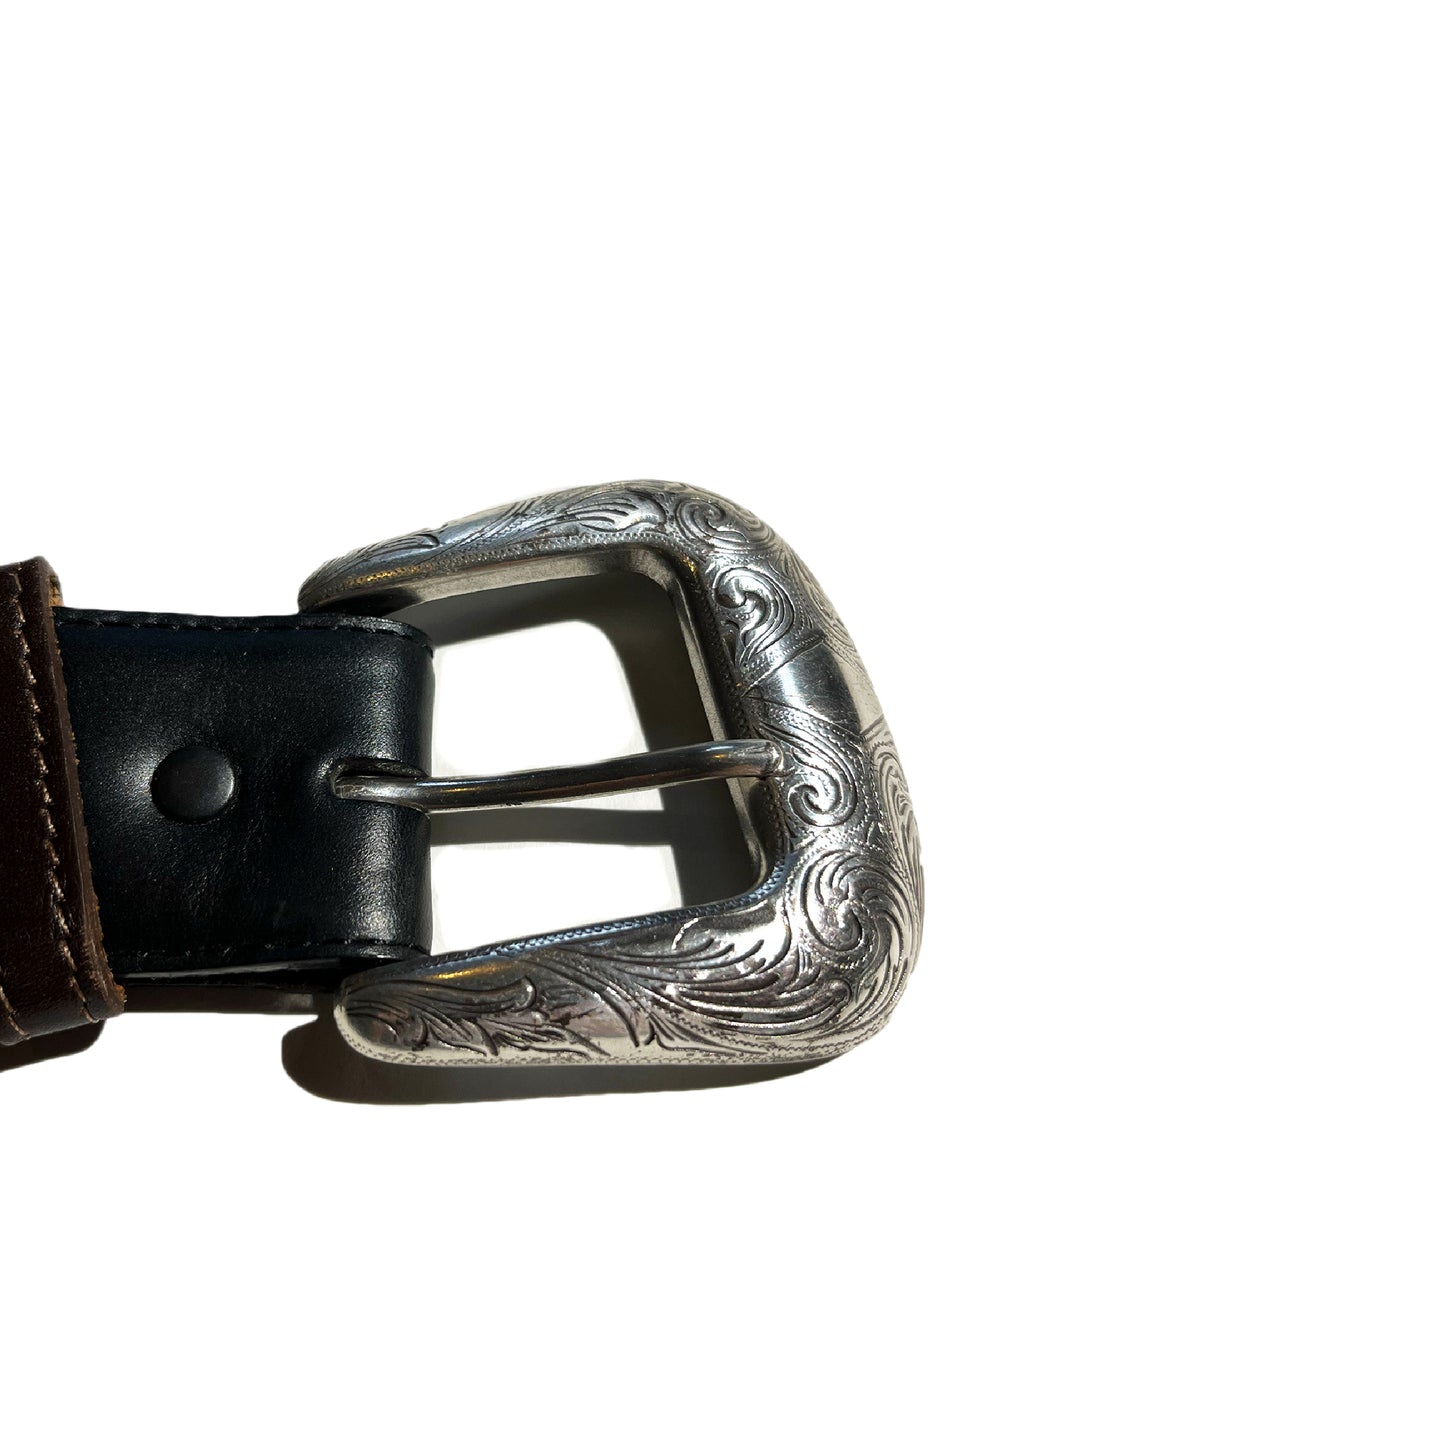 Vintage Leather Belt Western with Buckle